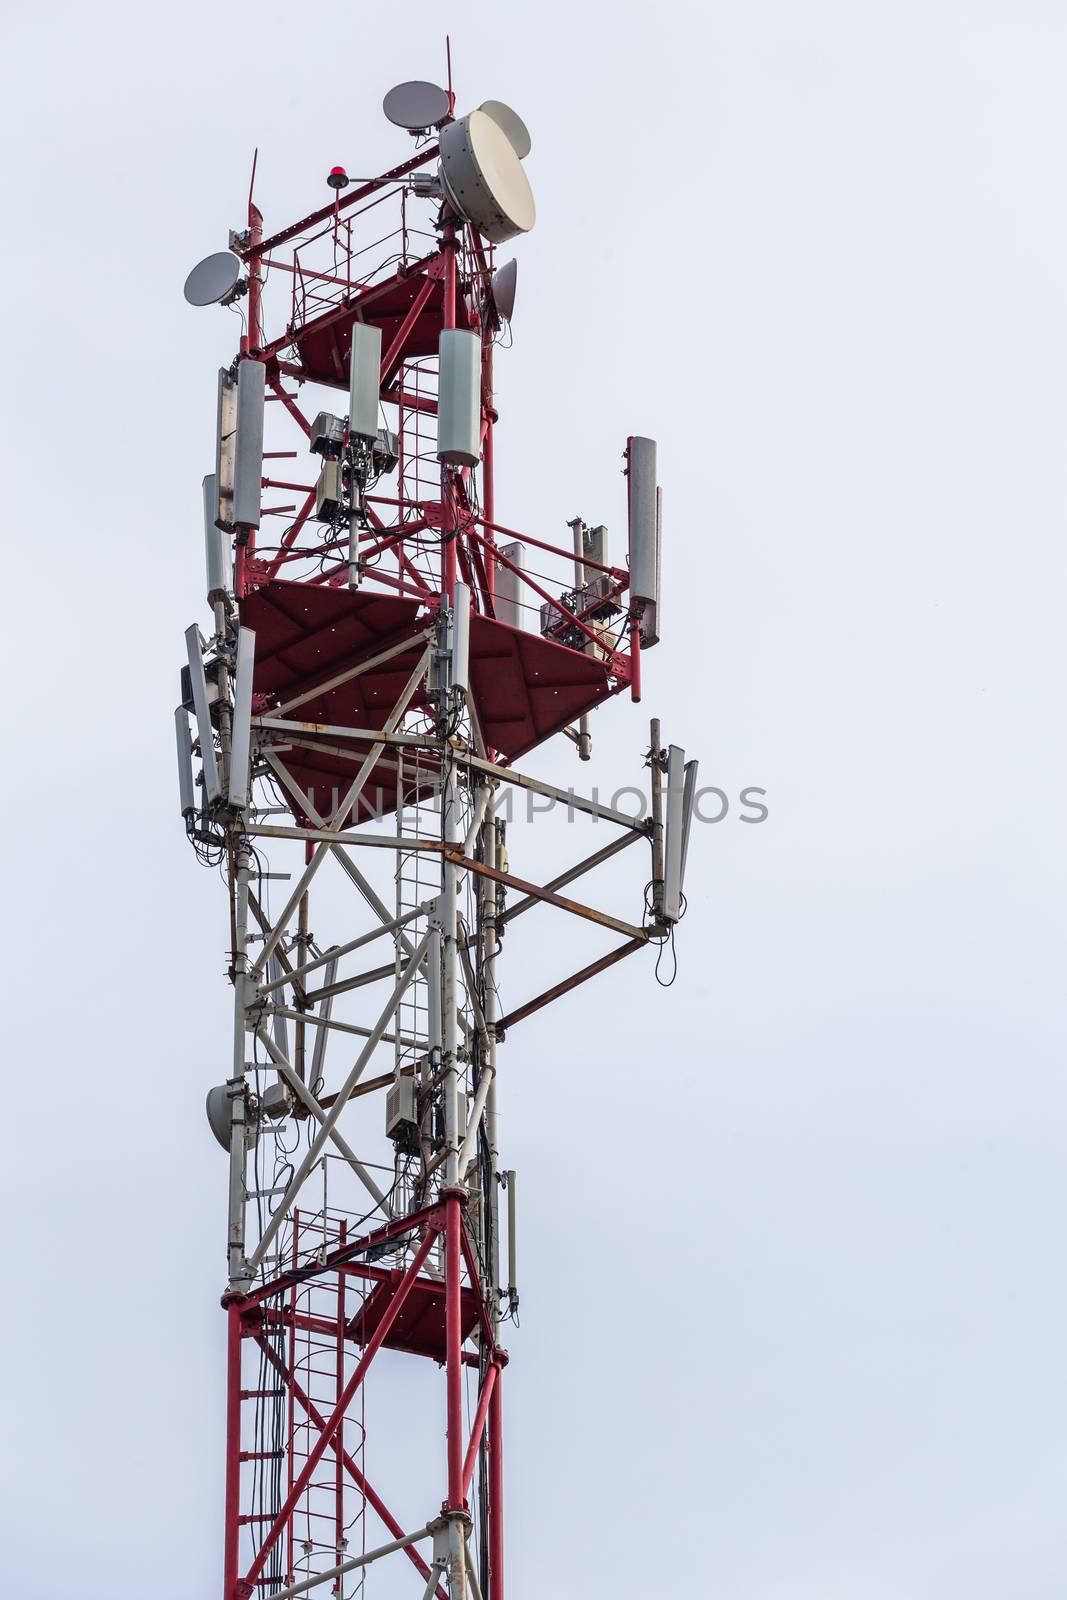 3G, 4G, 5G, wireless and cell phone telecommunication tower close-up on cloudy daylight sky background by z1b